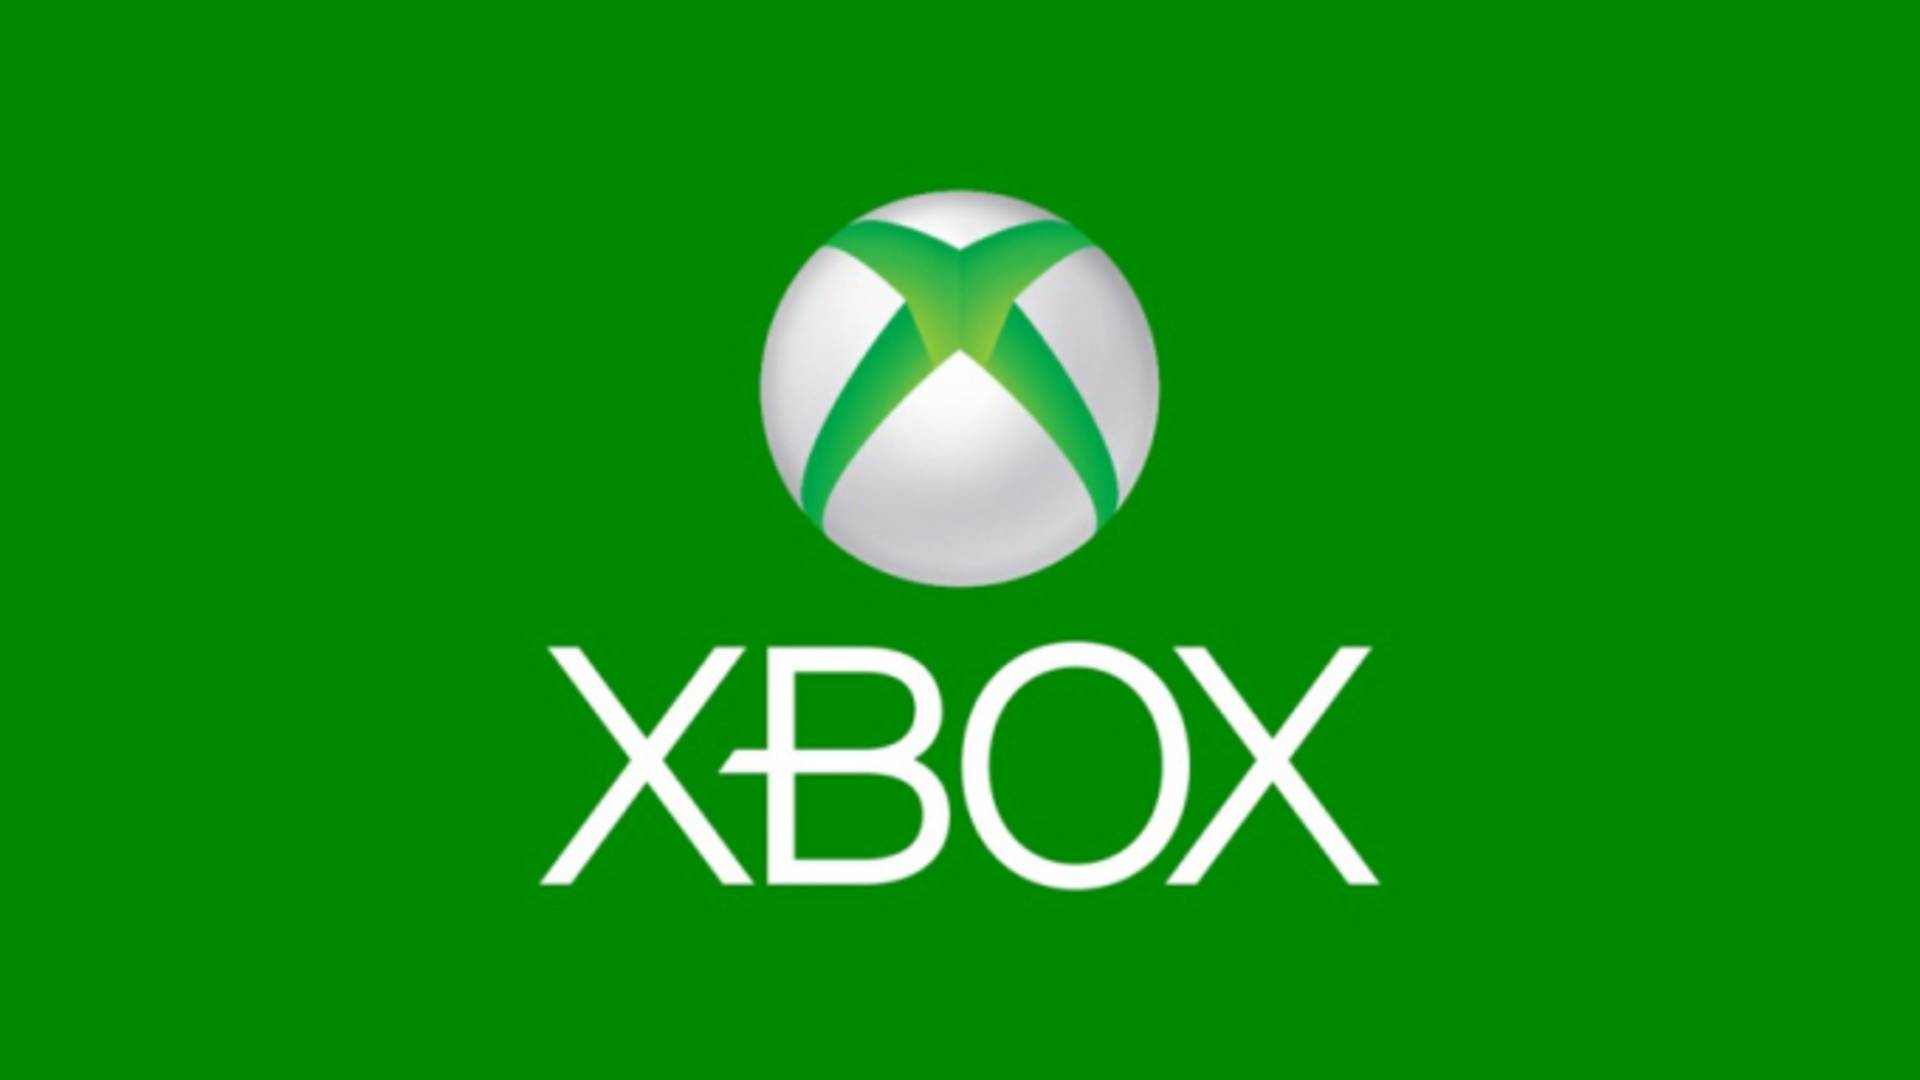 Good guy Xbox doesn't want the music industry harassing you